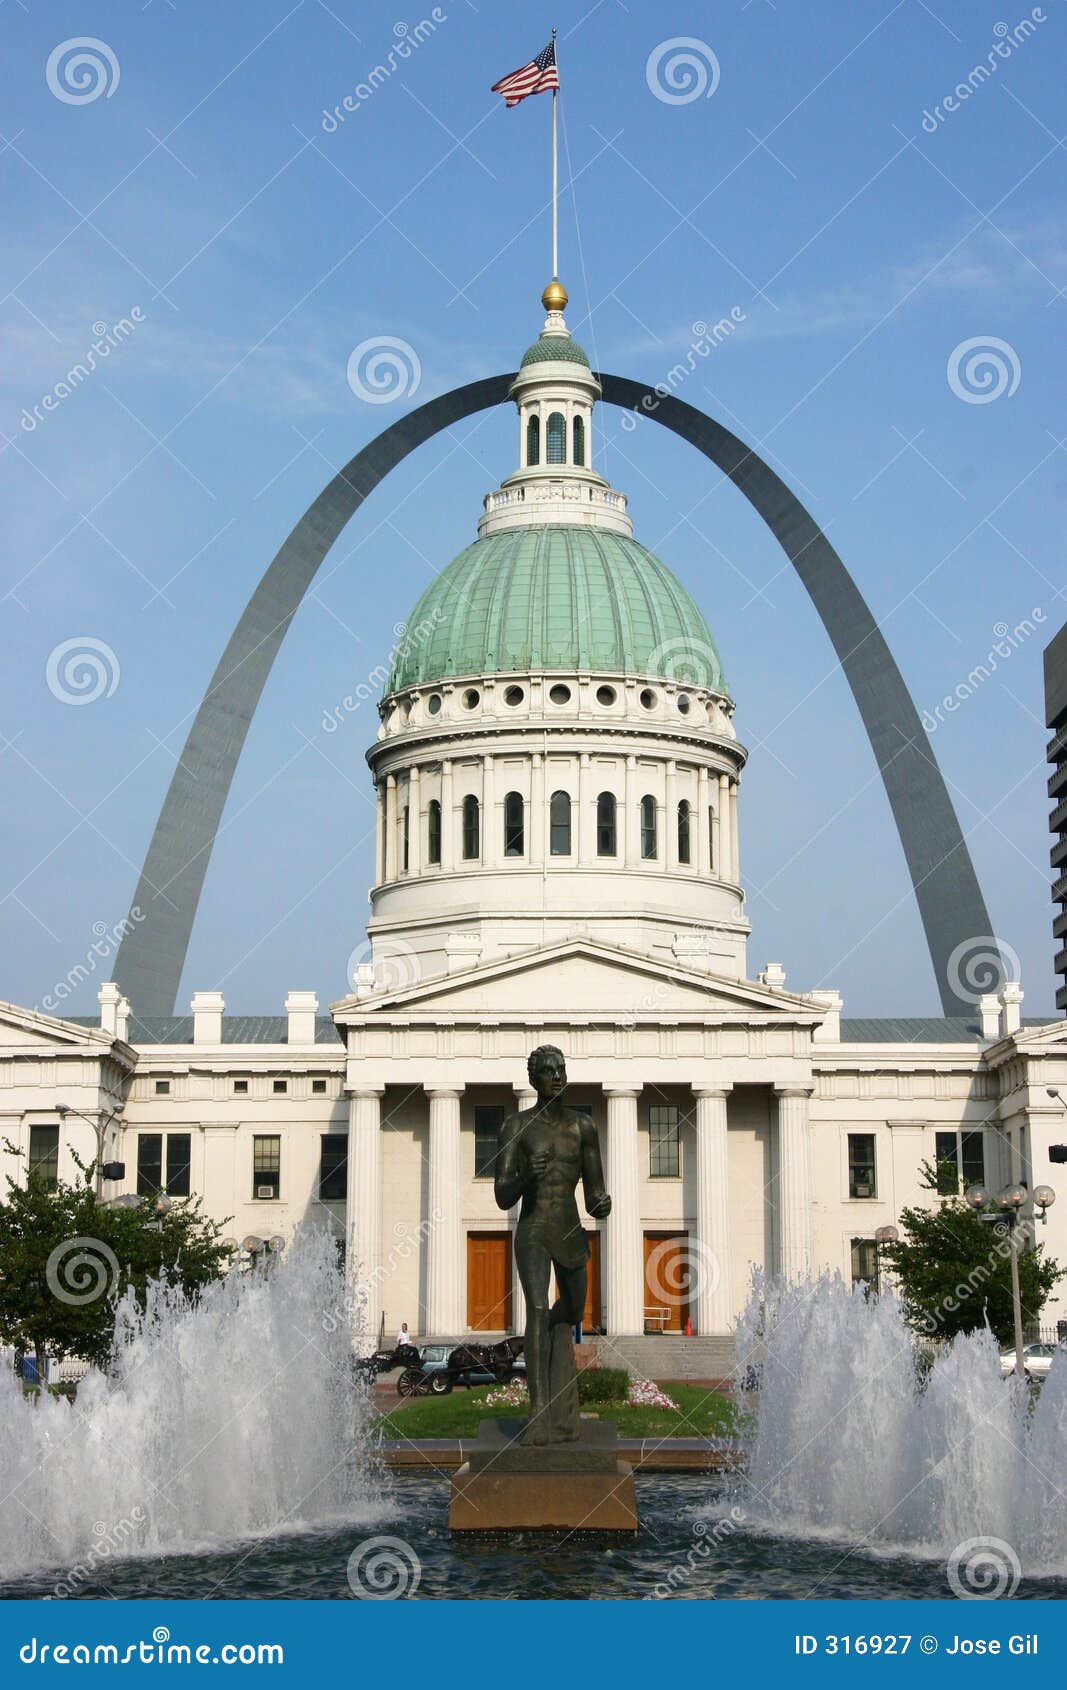 St. Louis Courthouse And Gateway Arch With Fountain Royalty Free Stock Photography - Image: 316927